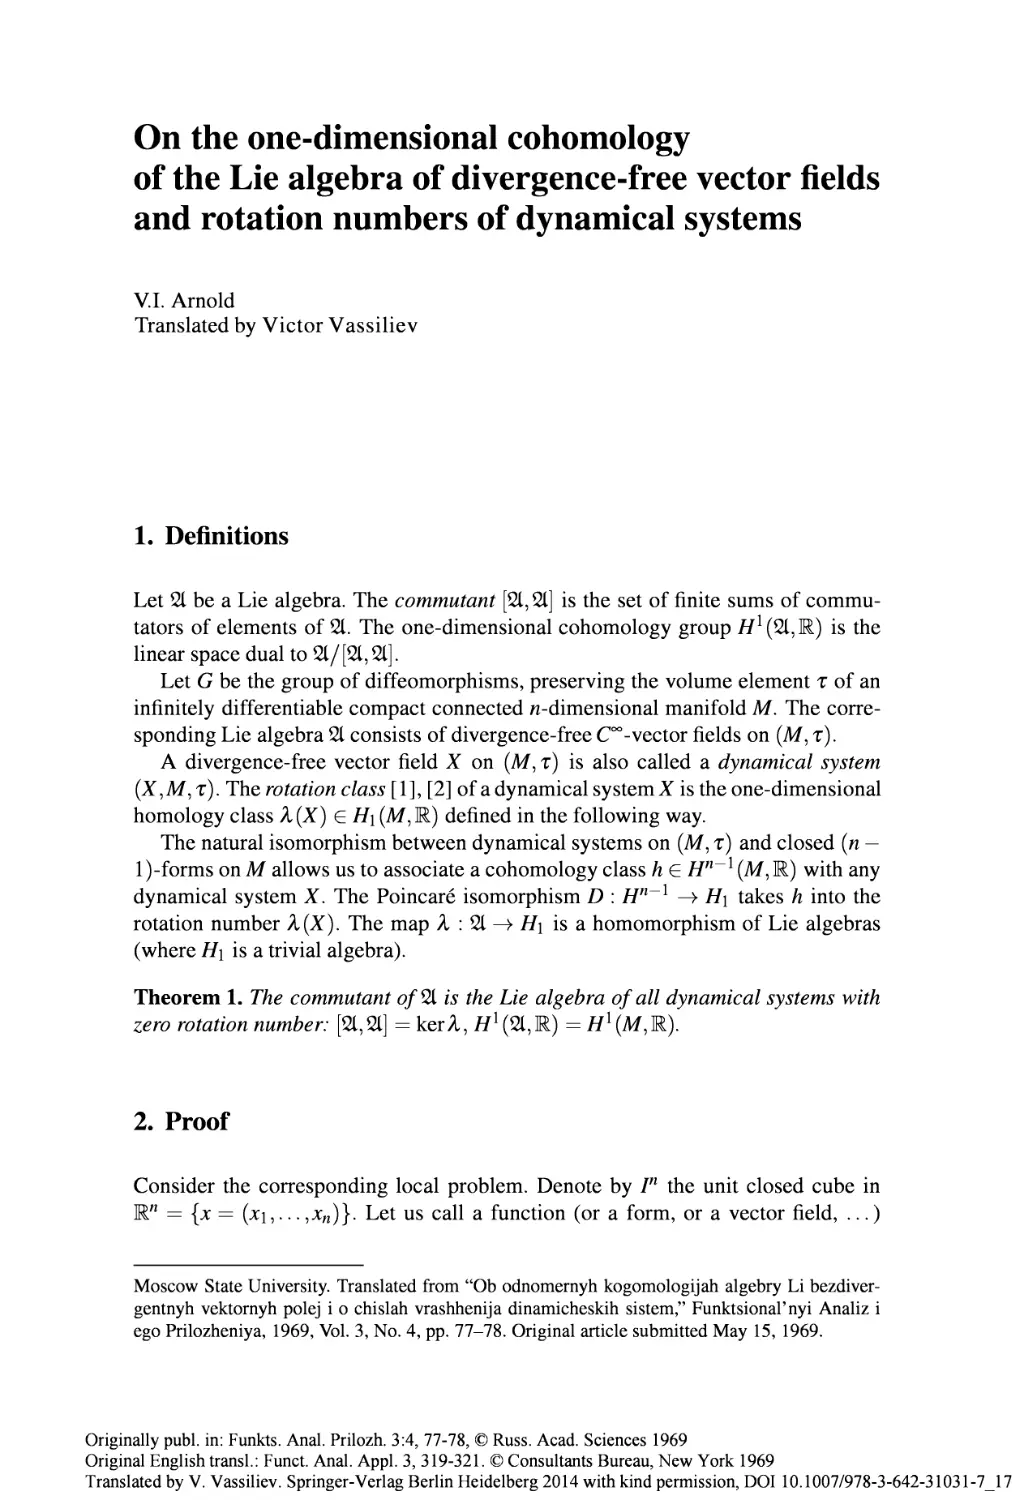 17 On the one-dimensional cohomology of the Lie algebra of divergence-free vector fields and rotation numbers of dynamical systems